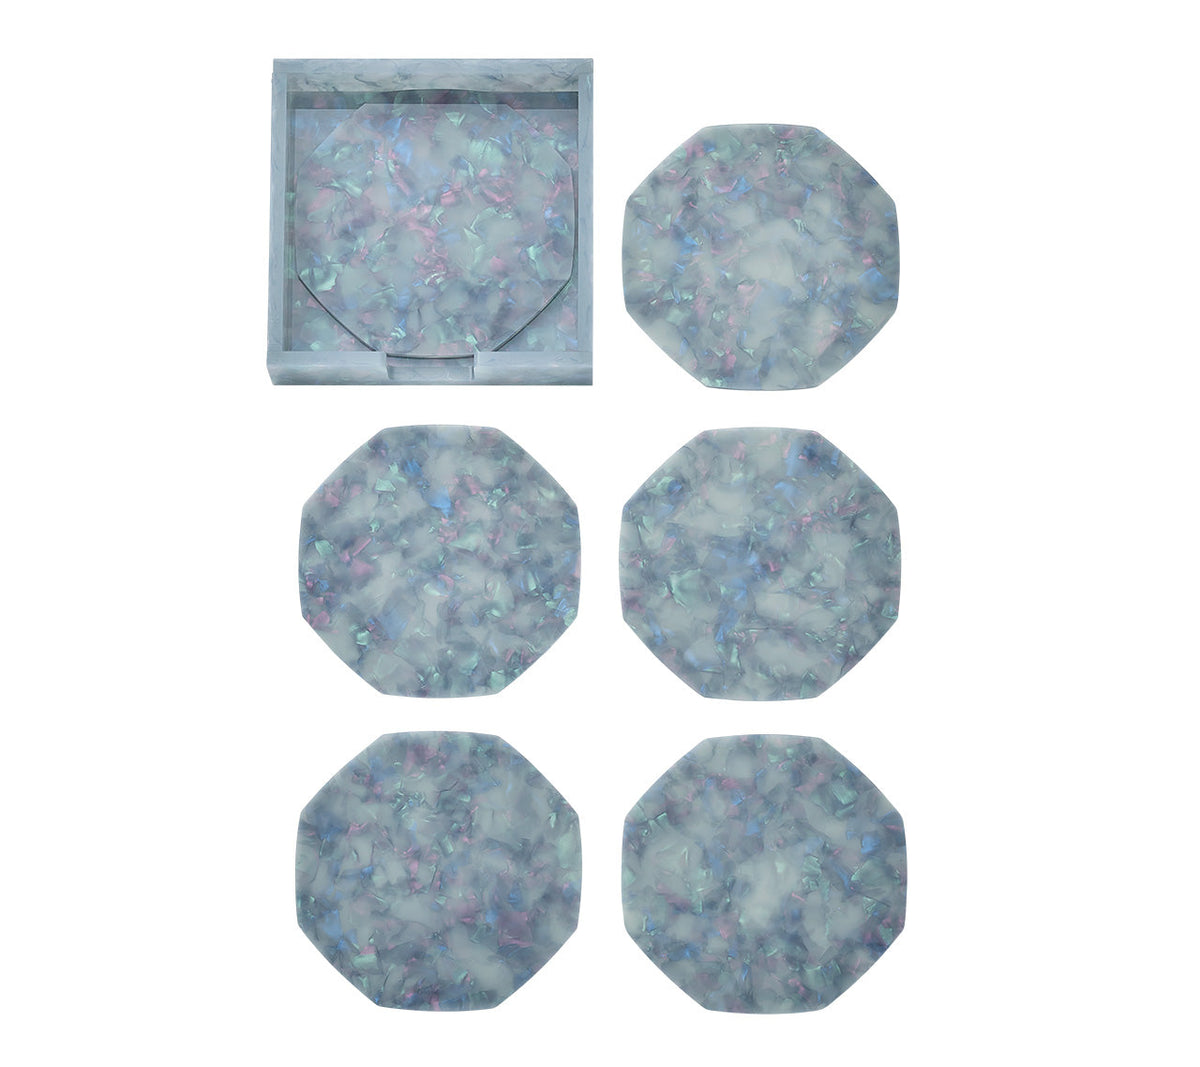 Gem Drink Coasters in Blue, Set of 6 in a Caddy